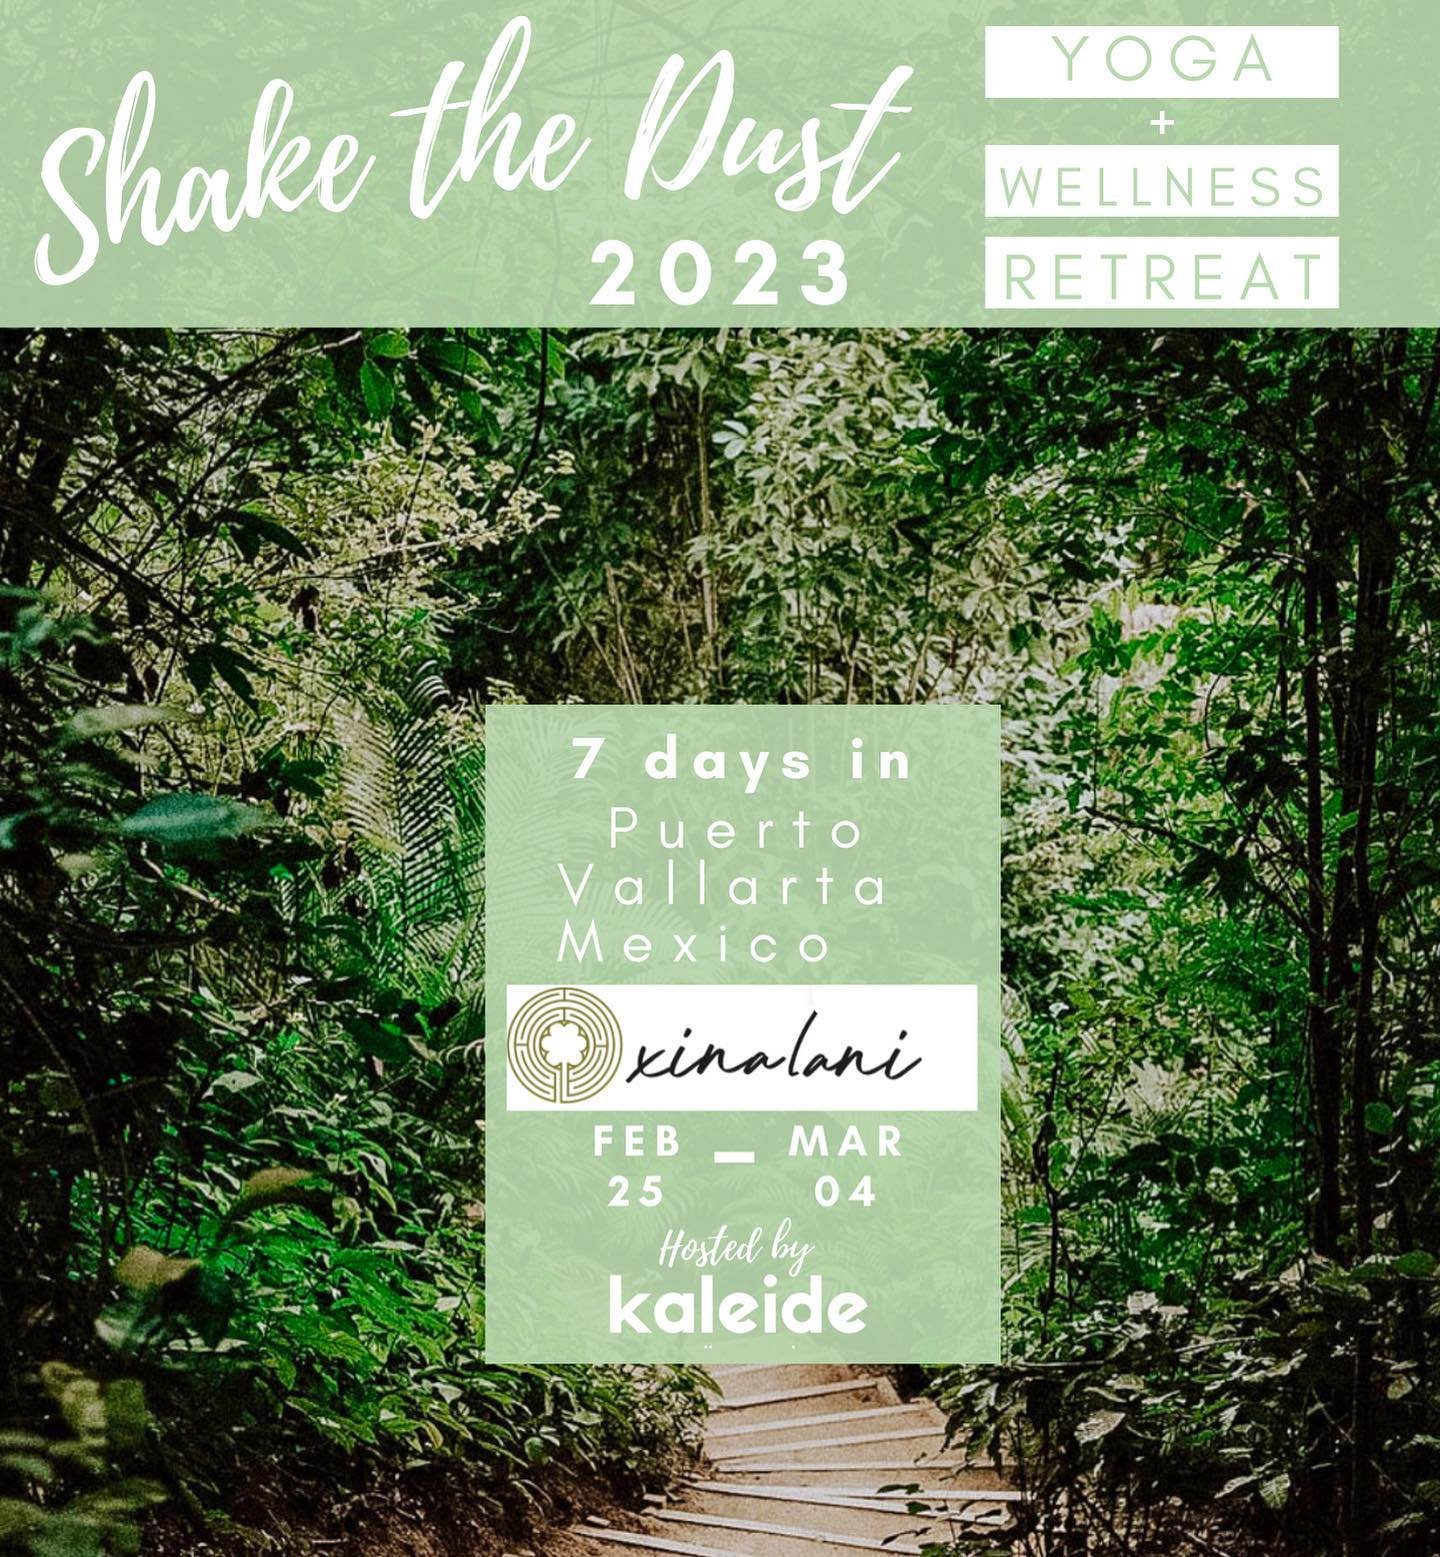 It&rsquo;s that time! 
✨Shake the Dust 2023✨
Spots are limited! Check out our website to register today! ☀️